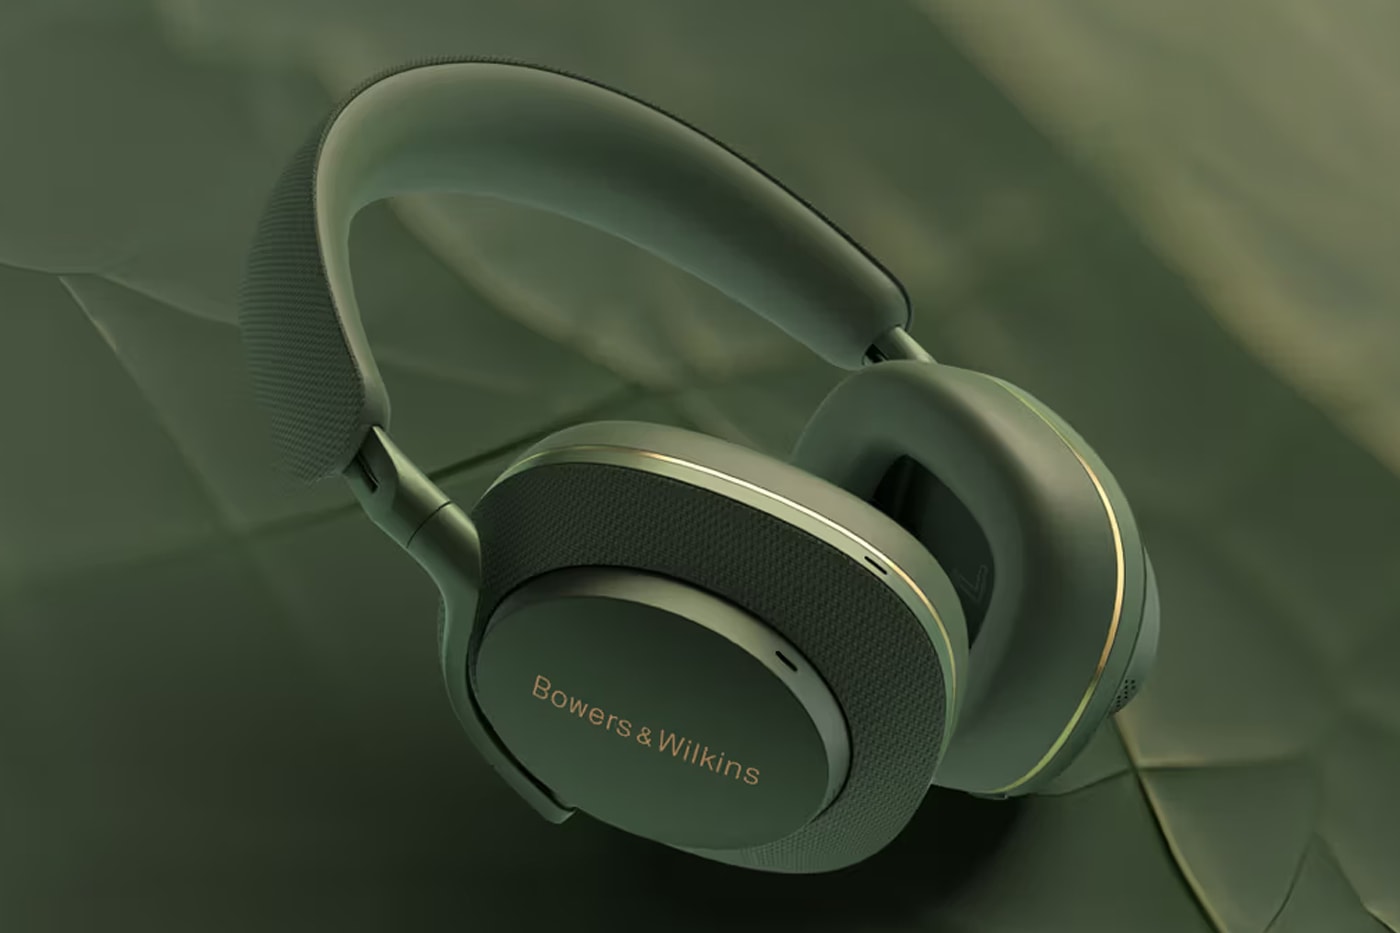 Bowers & Wilkins Monochromatic Wireless Headphones Px 7 S2e price specs details launch bluetooth noise cancelling colors website buy purchase